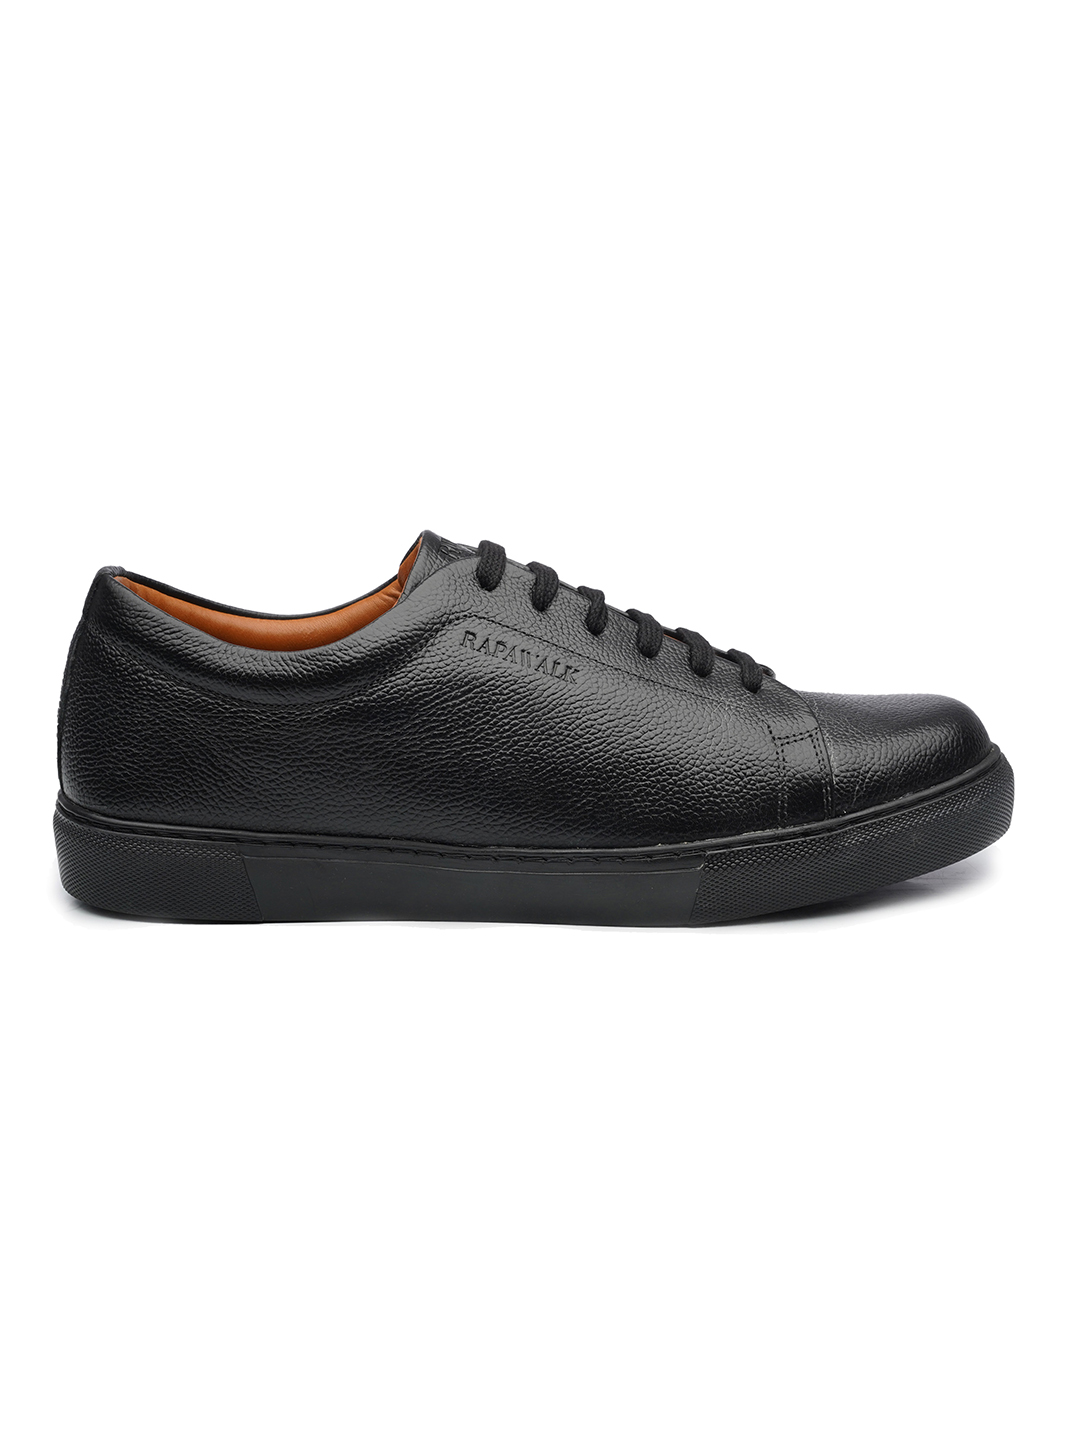 Big Kids Classic Leather Casual Shoes in Black/Core Black Size 4.0 Finish Line Shoes Flat Shoes Casual Shoes 